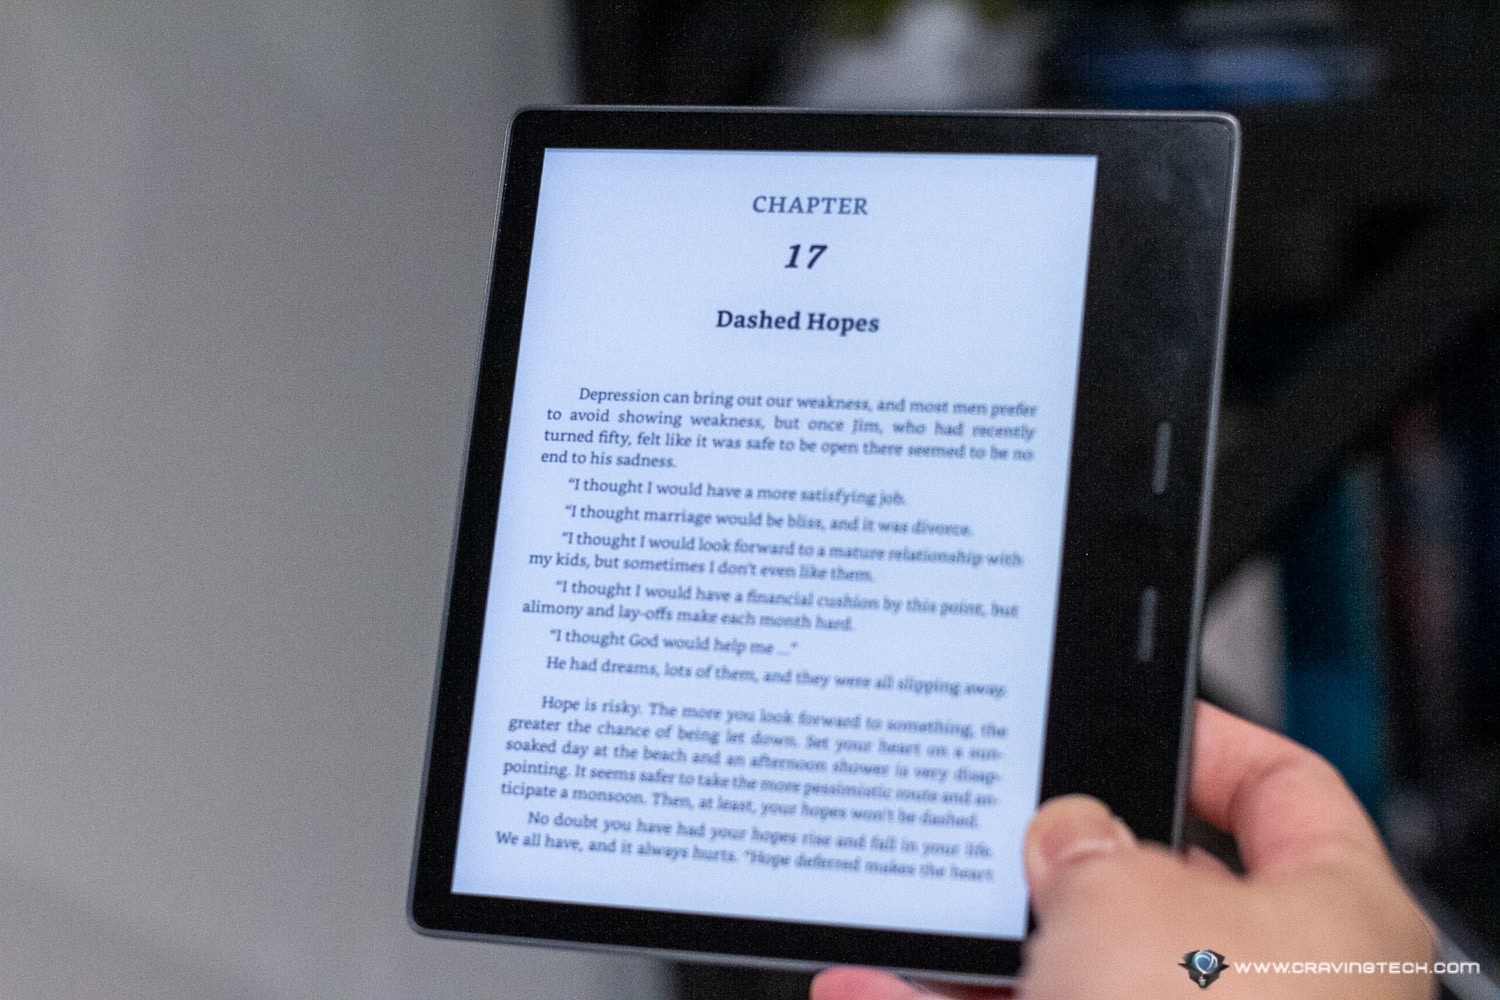 Amazon Kindle Oasis Review - The Easiest on the Eyes Kindle